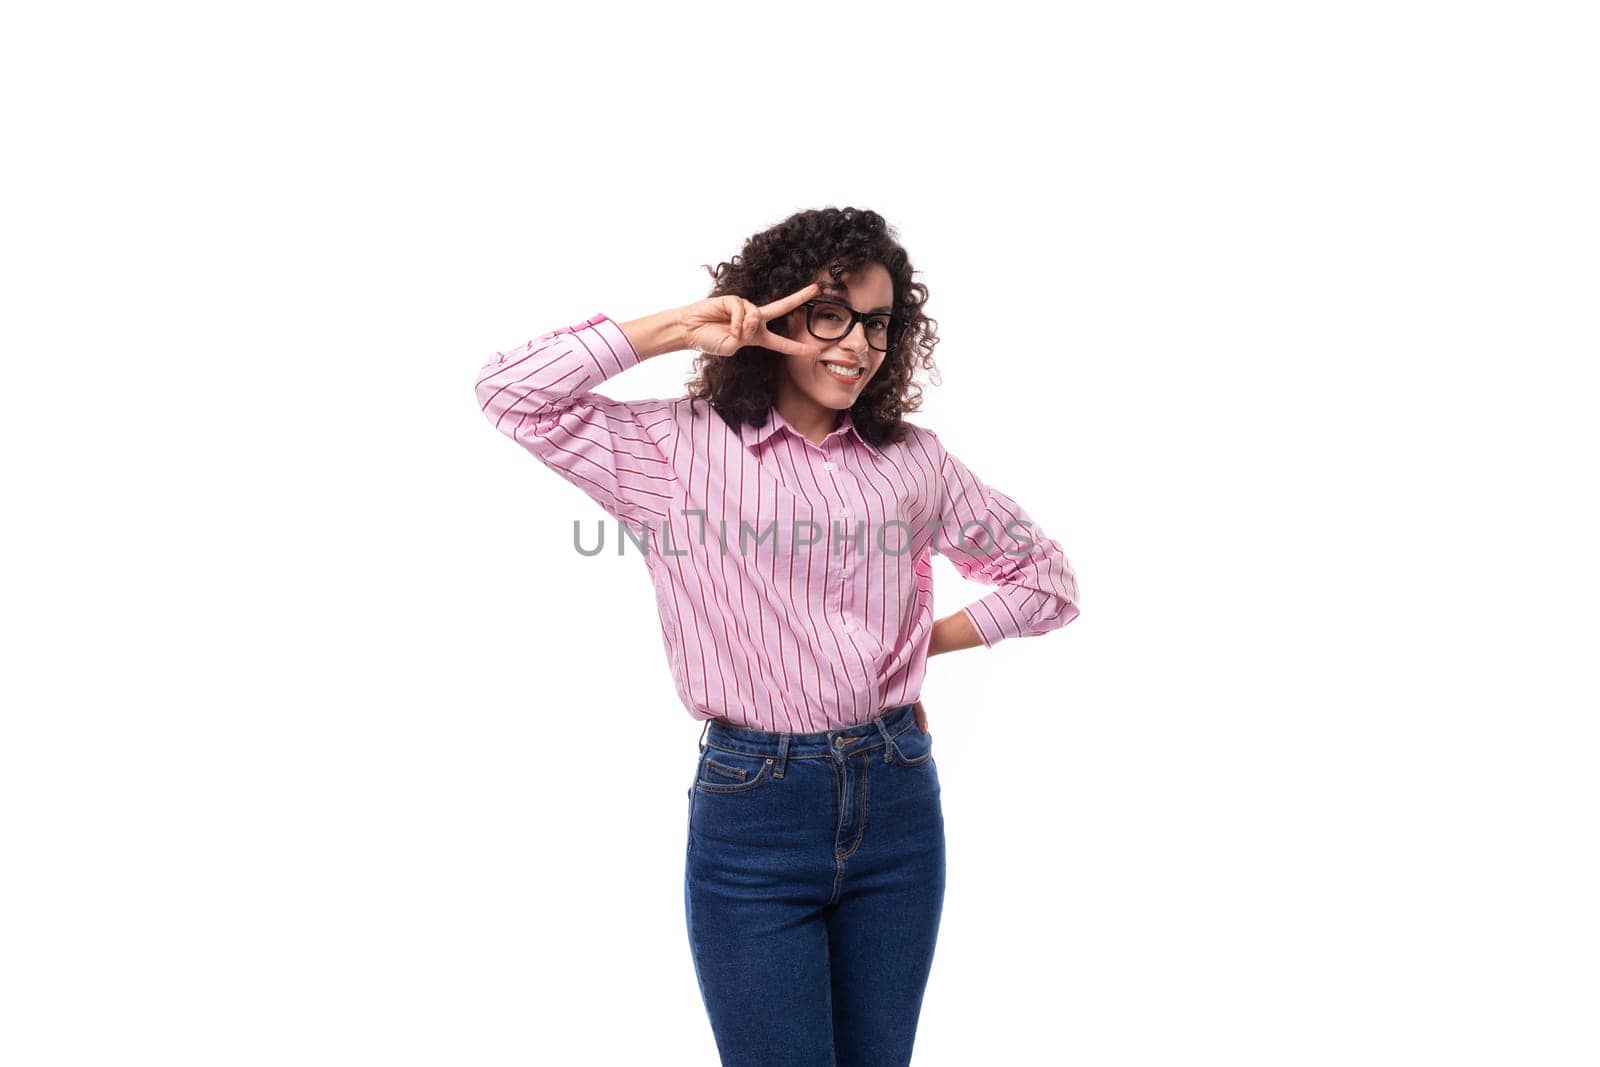 young slender caucasian woman with a curly haircut is dressed in a striped shirt by TRMK